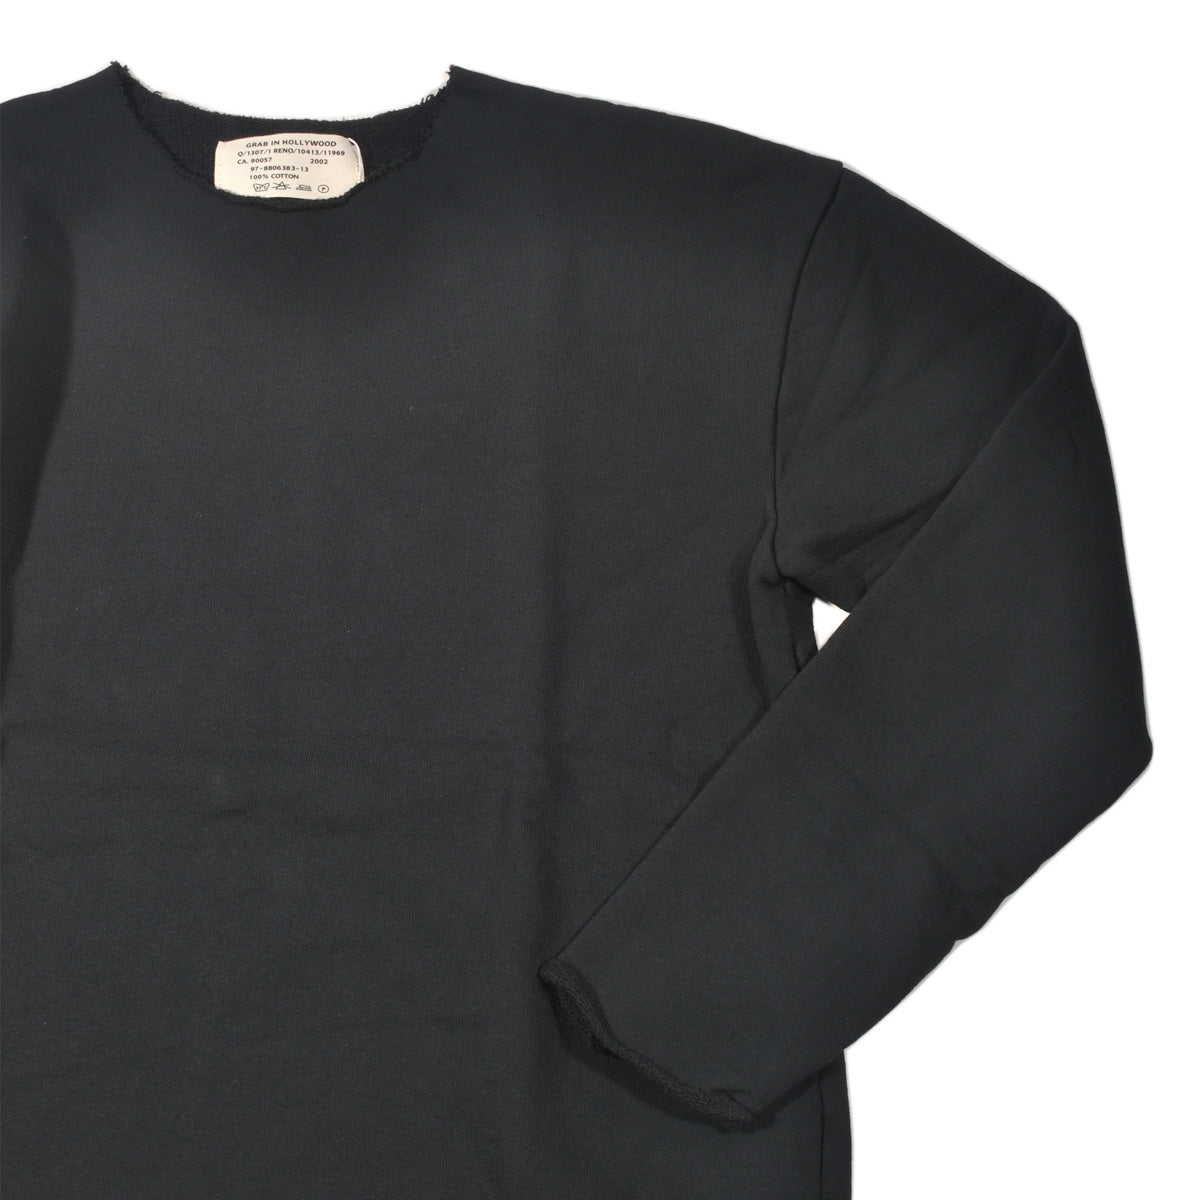 VINTAGE FRENCH TERRY RELAX FIT ALL CUT L/S[ビンテージフレンチテリー リラックスフィット オールカット長袖]BLACK